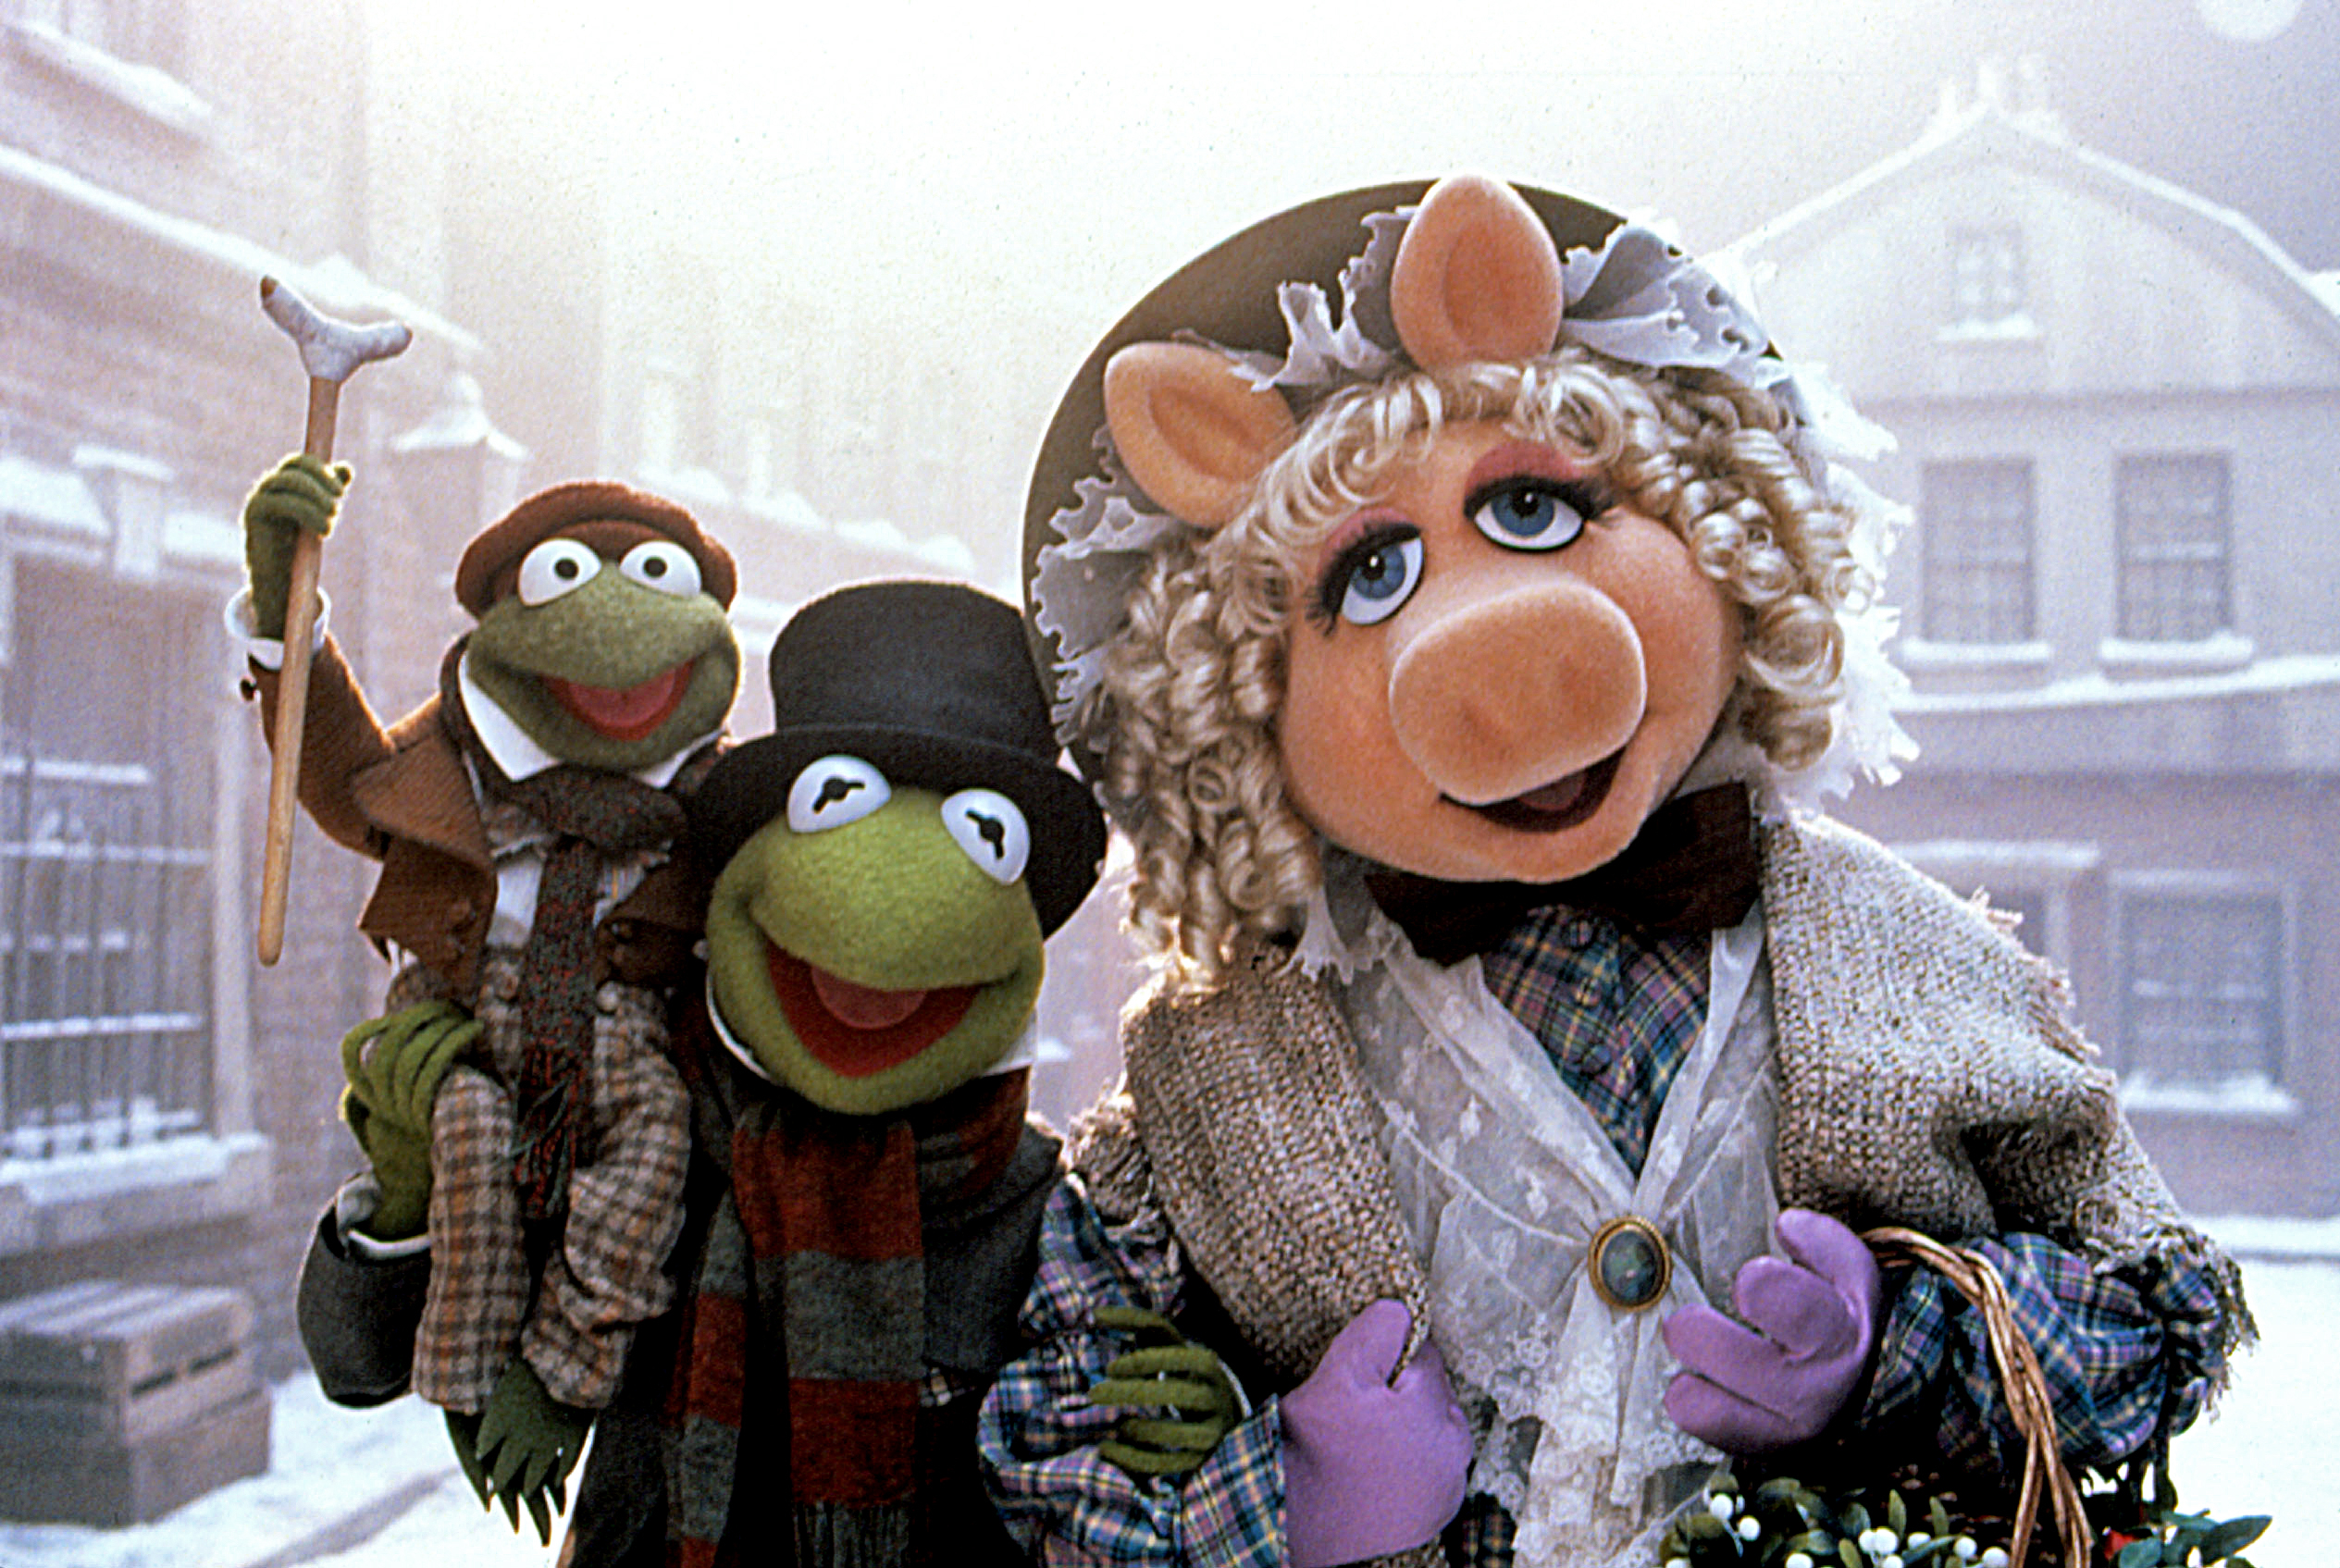 Kermit and Miss Piggy dressed as Charles Dickens characters in &quot;The Muppet Christmas Carol&quot;